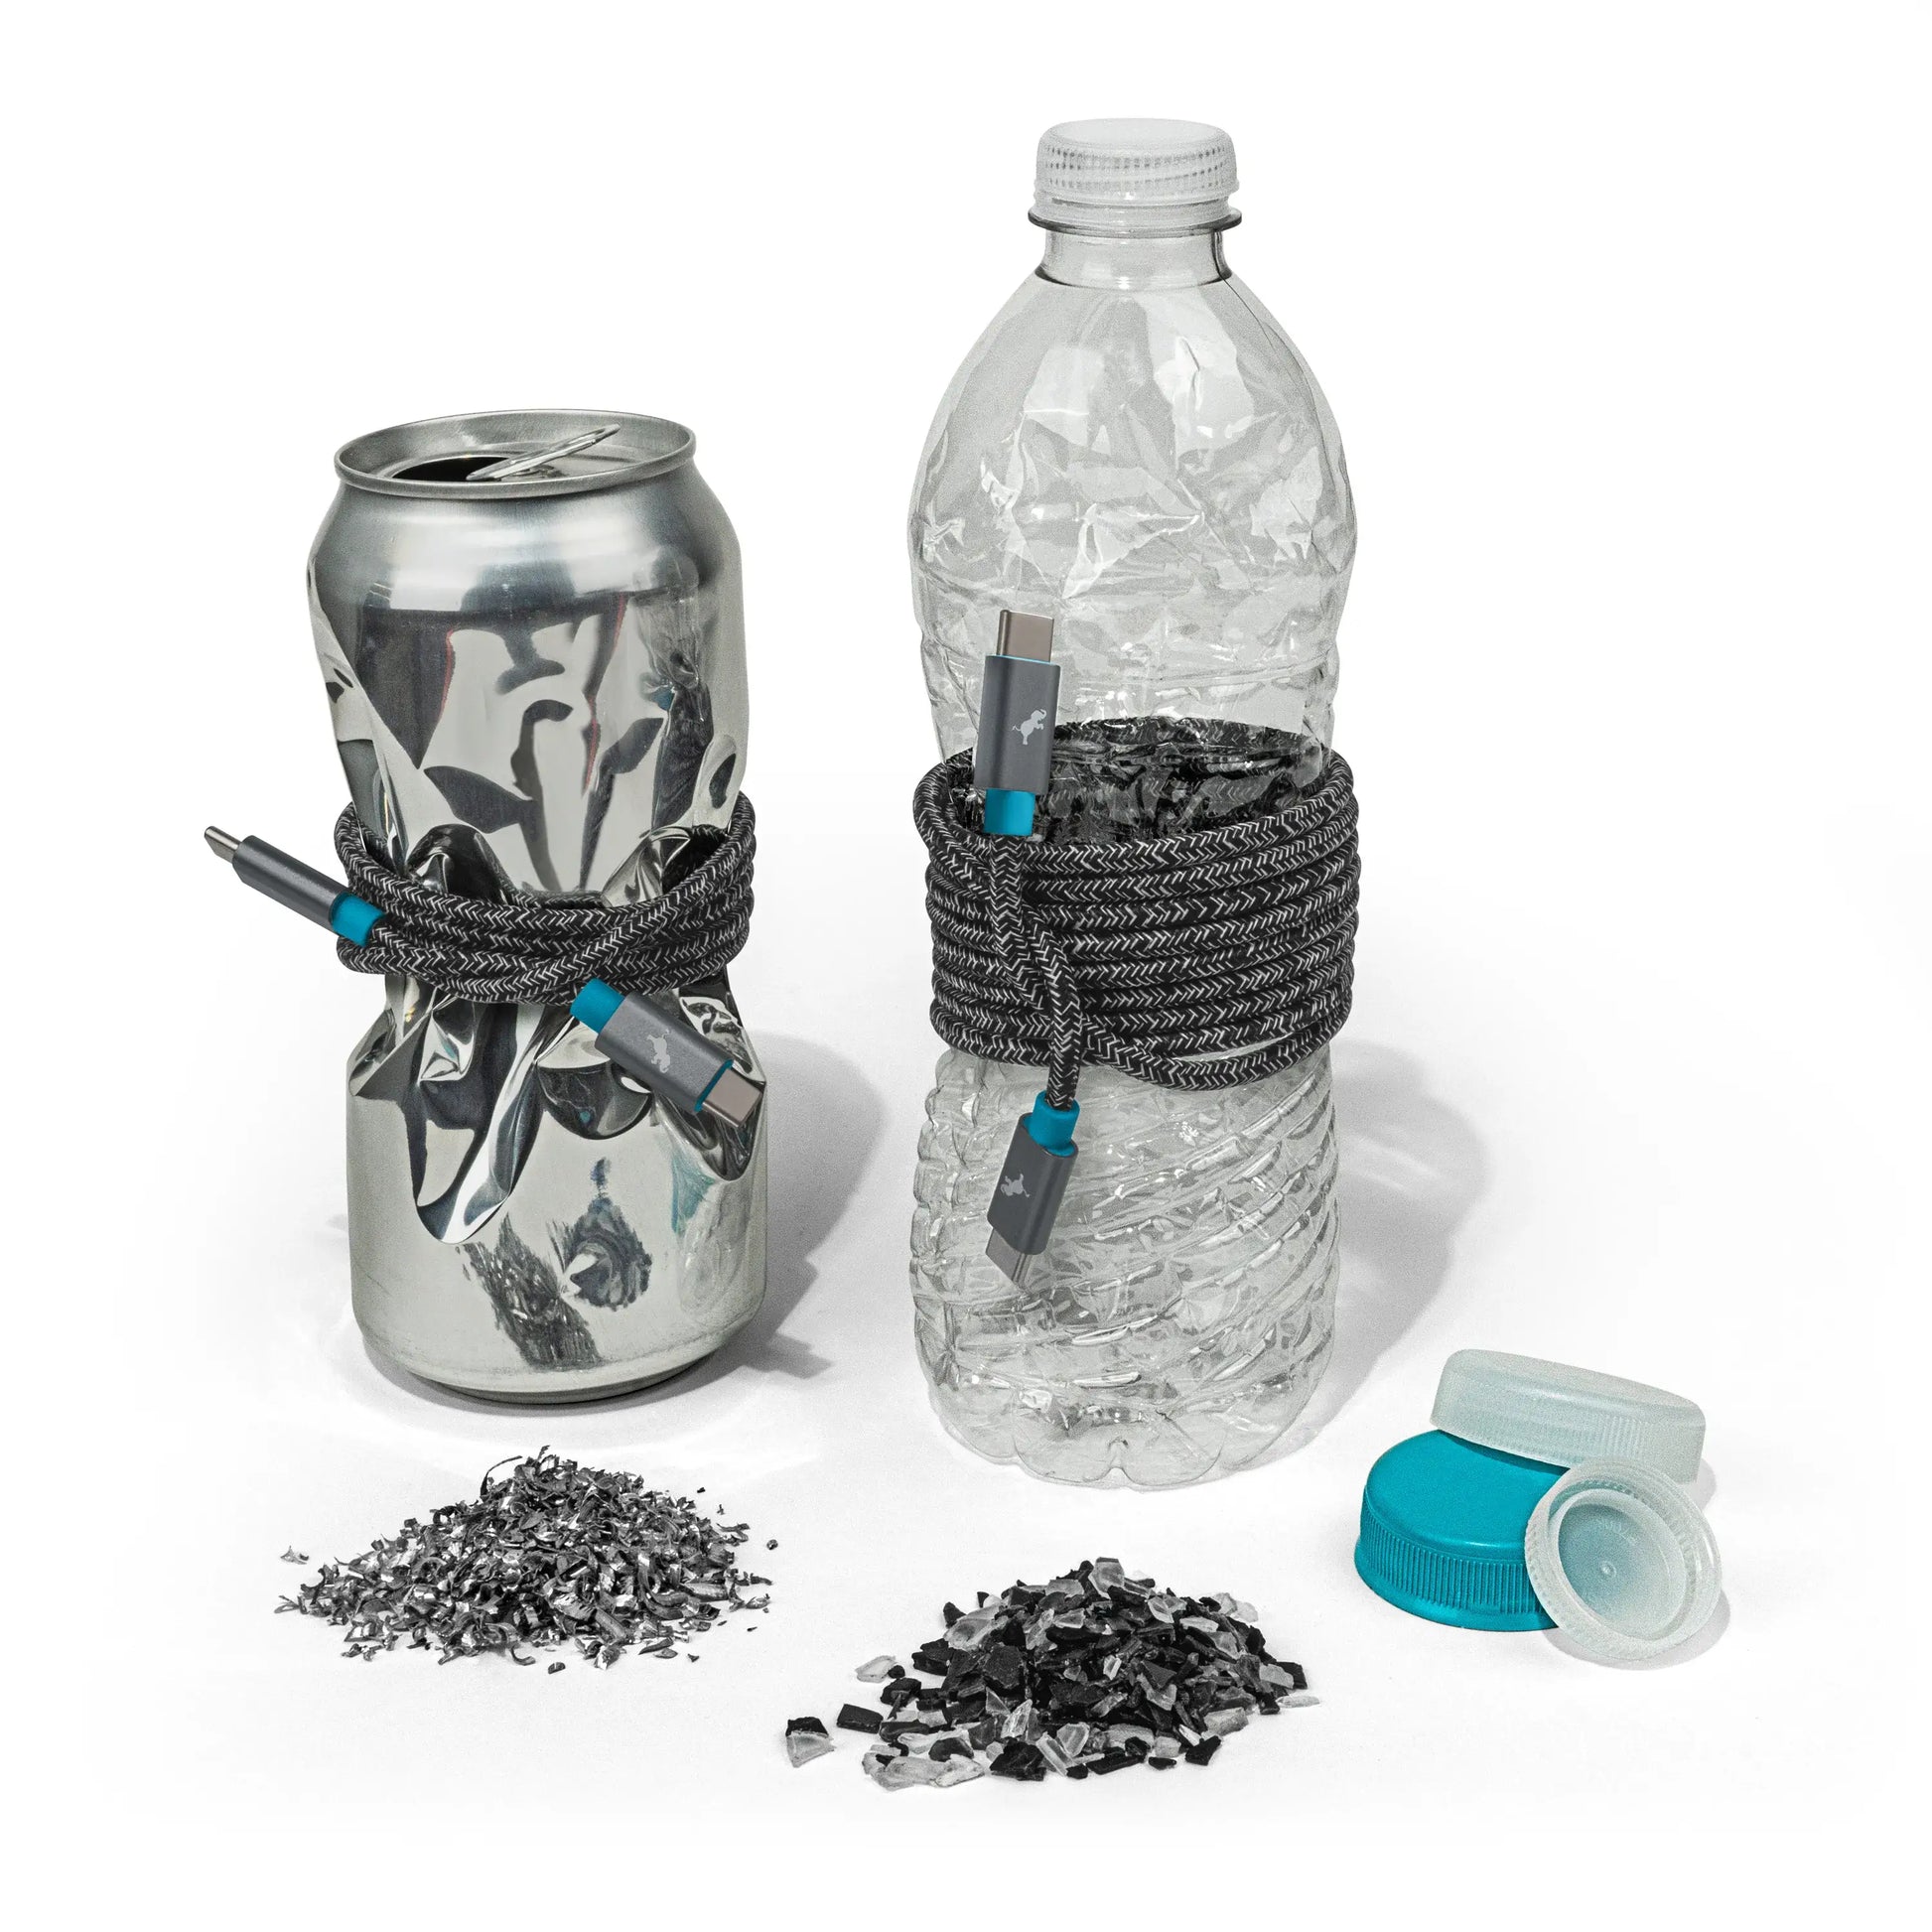 USB-C cables wrapped around a can and a bottle.